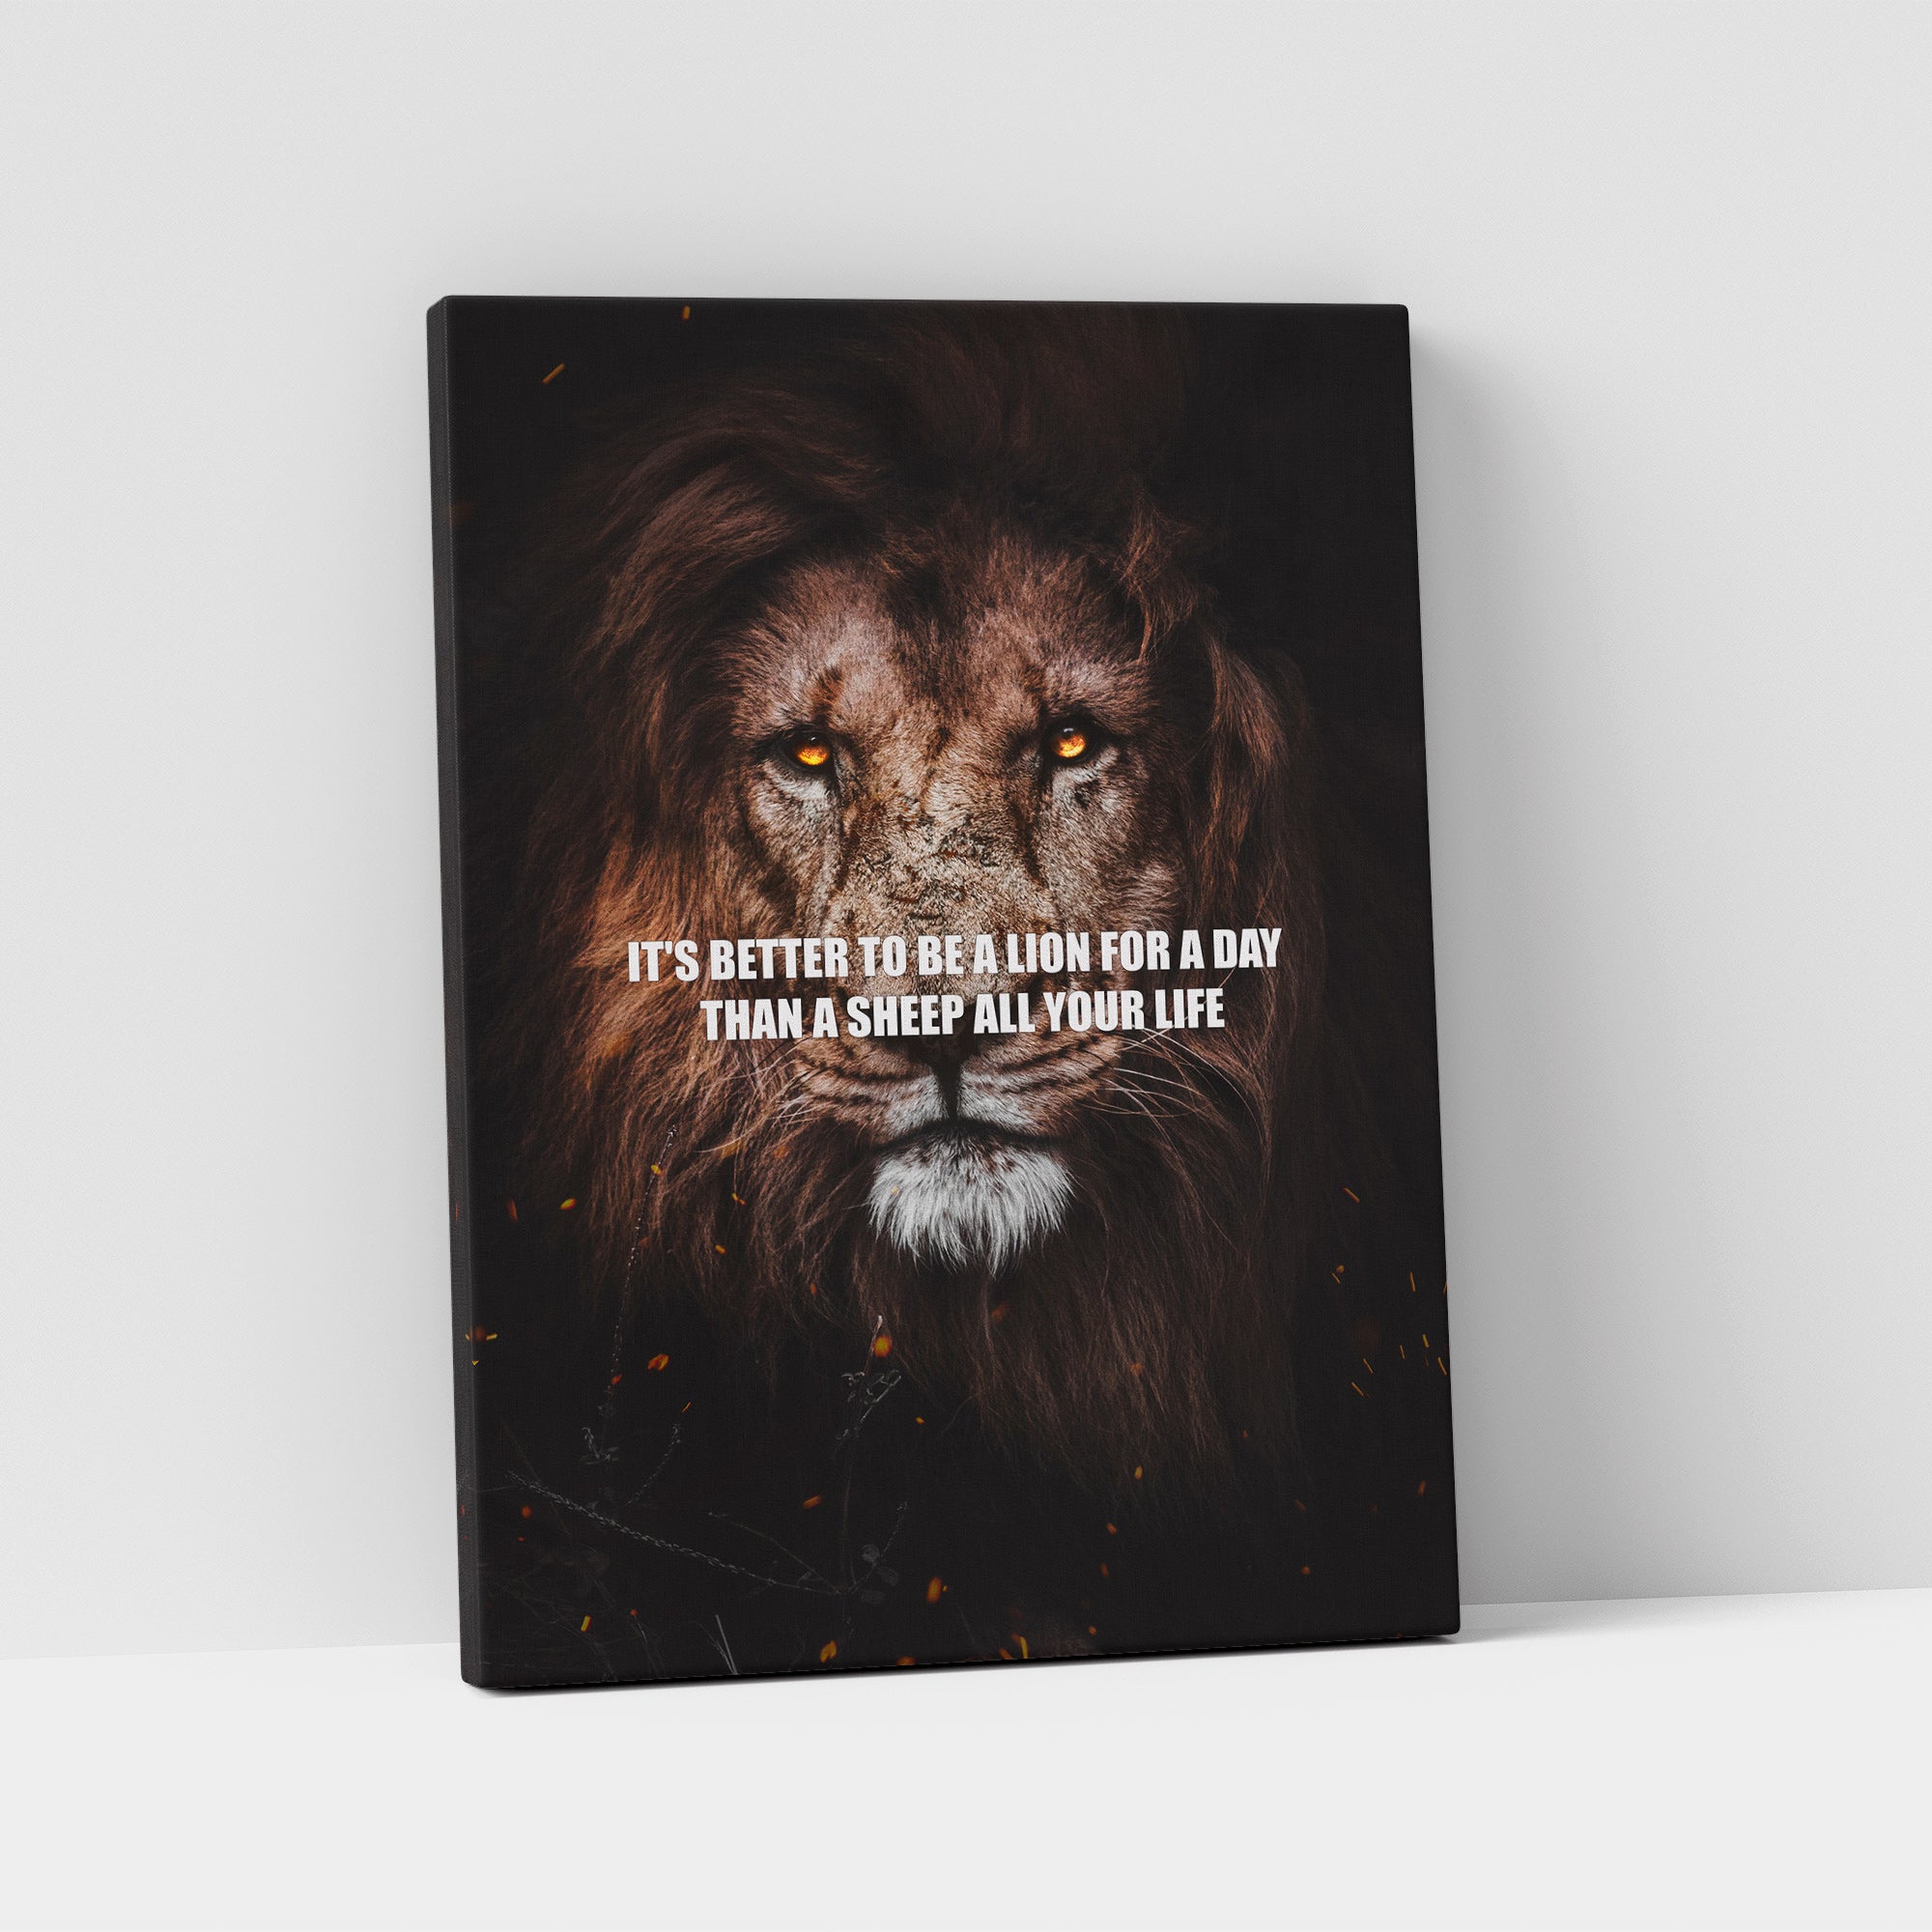 Become The Lion